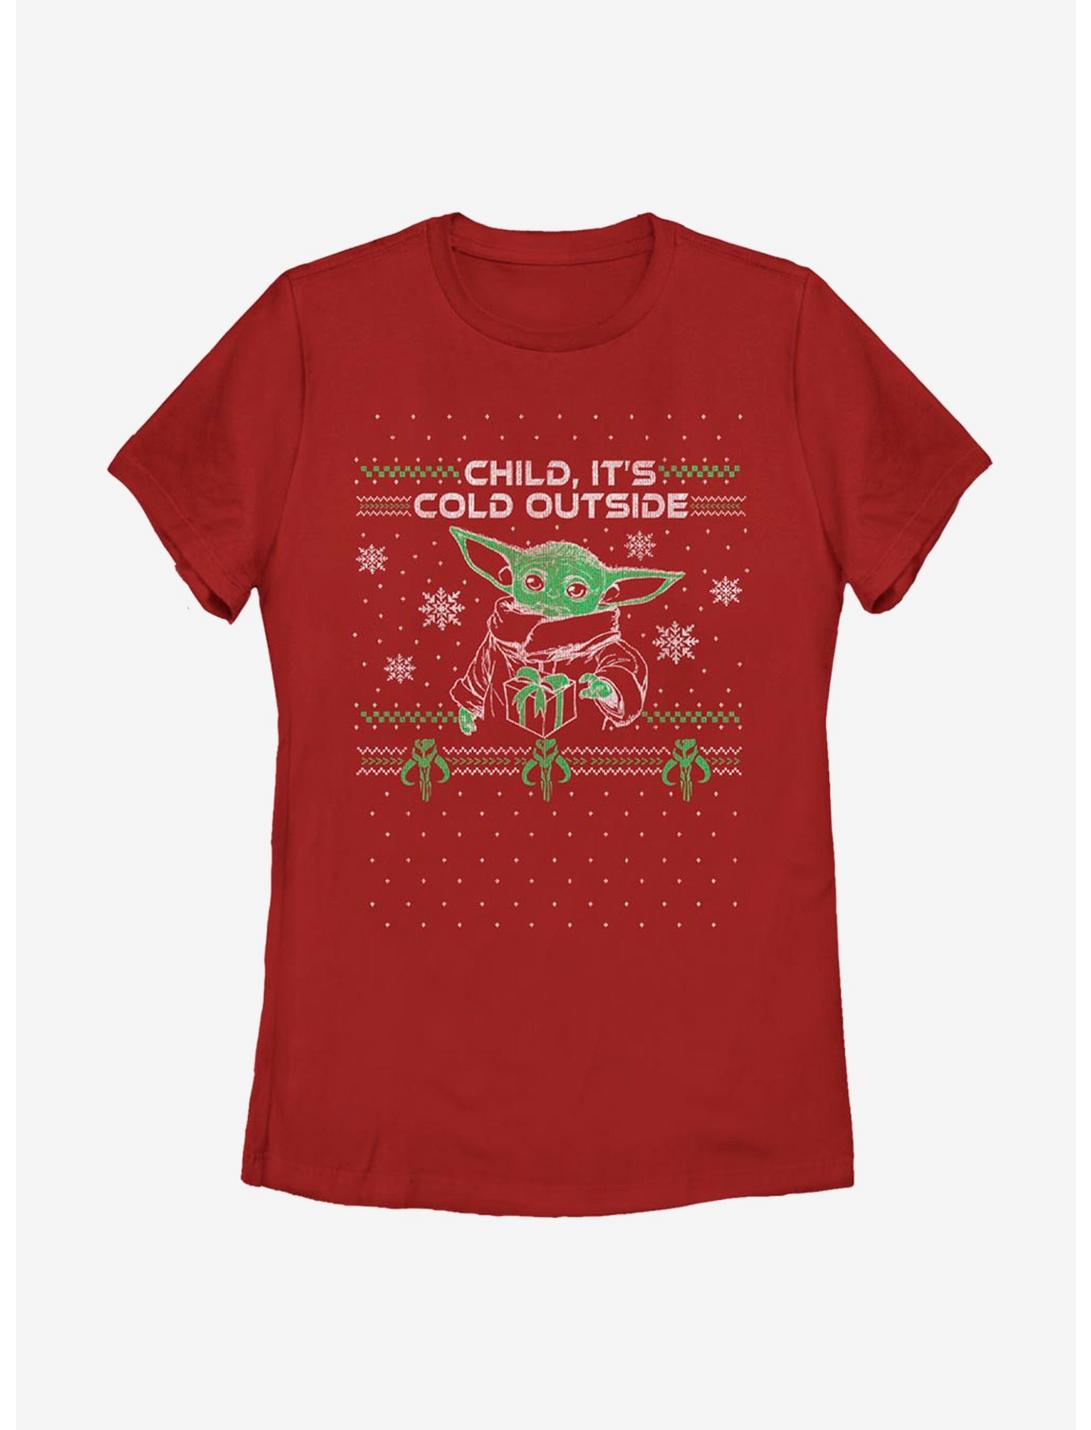 Star Wars The Mandalorian The Child It's Cold Outside Womens T-Shirt, RED, hi-res